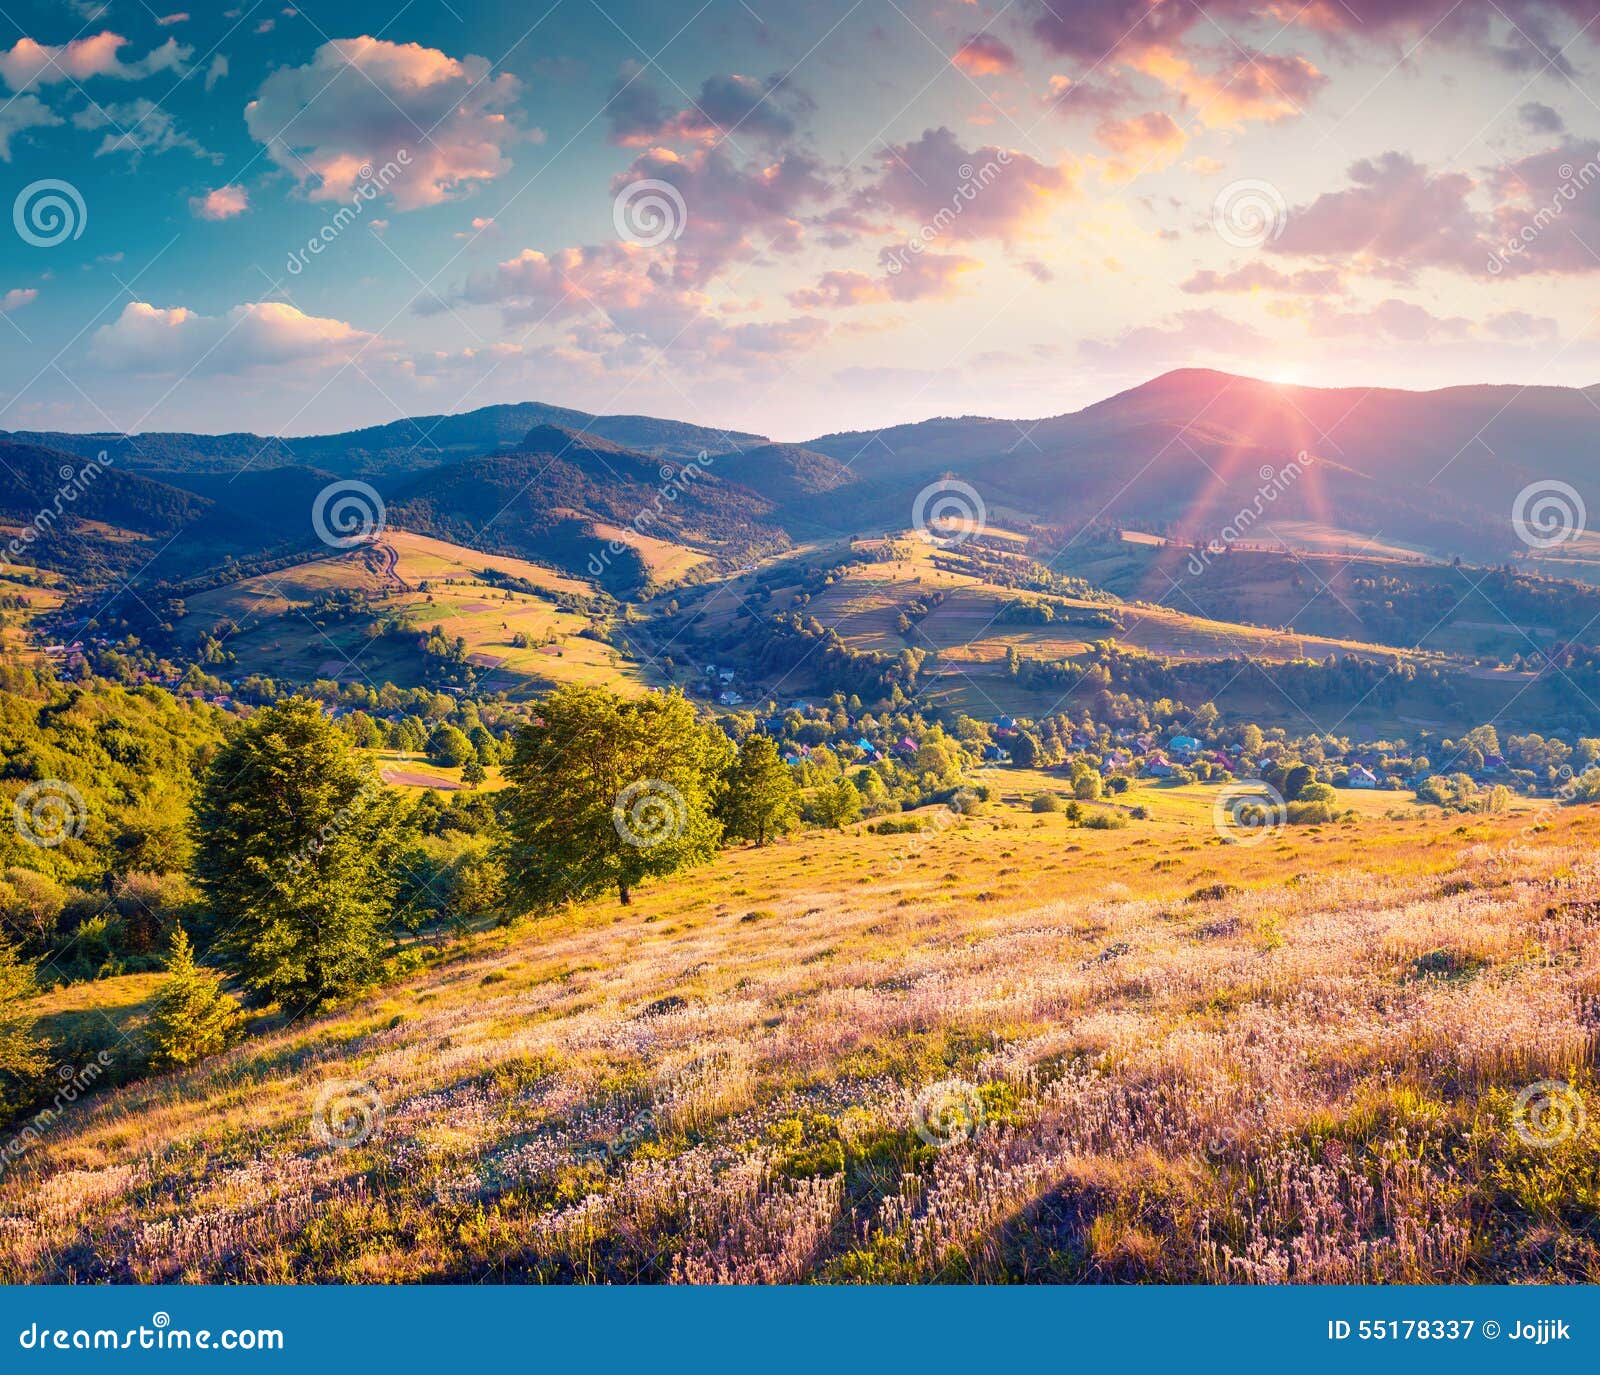 Colorful Summer Sunrise In The Carpathian Mountains Stock Image Image